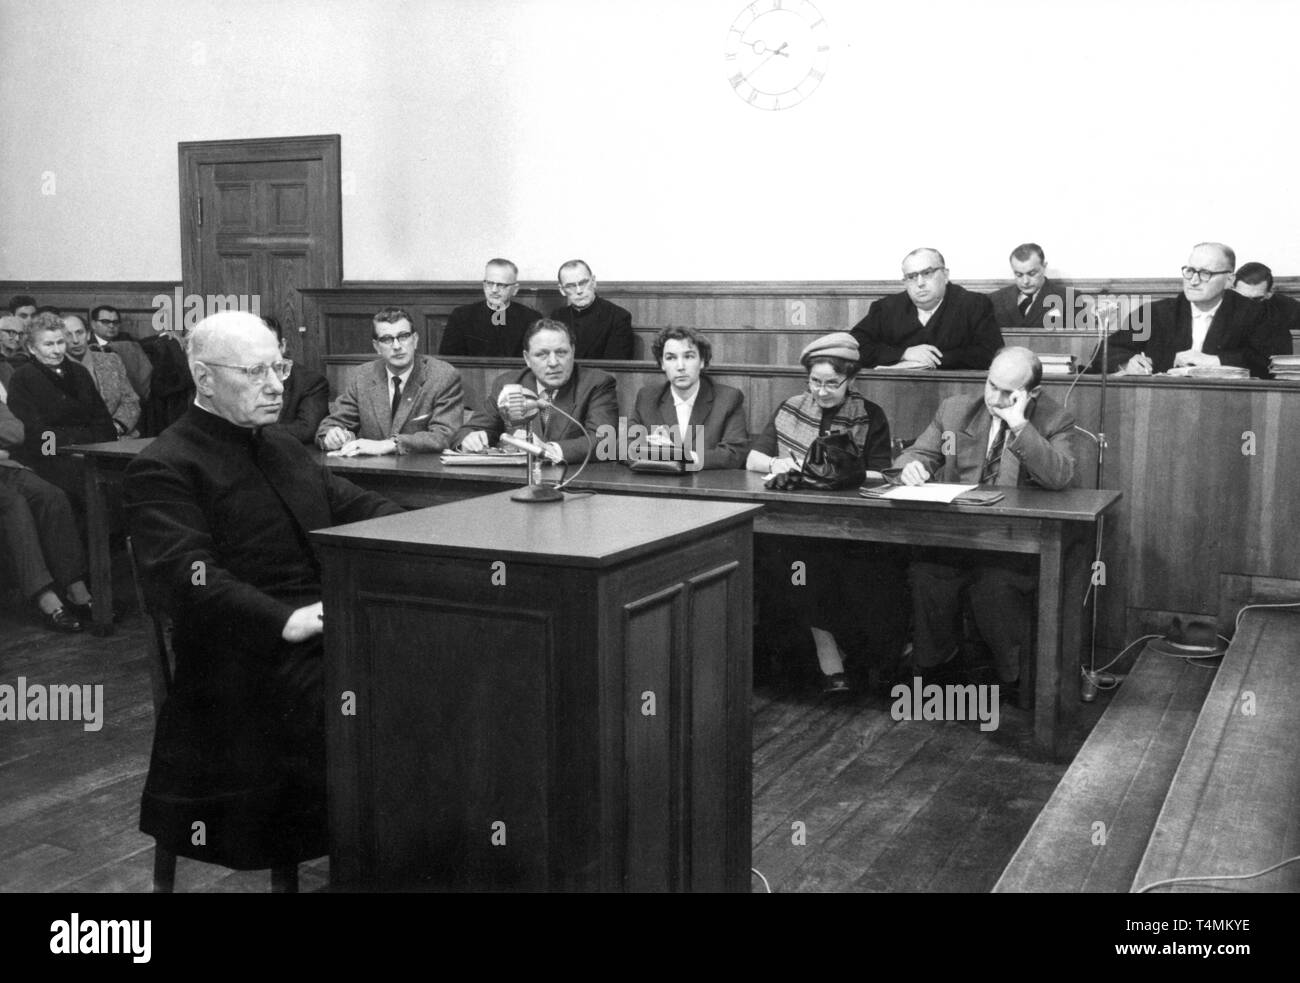 Concentration camp inmate Bishop Neuhaeusler (l) giving testimony on 29 December. On 13 October 1958 trial was opened in Bonn (Germany) against former guards of the concentration camp Sachsenhausen Wilhelm Schubert and Gustav Sorge (background far right). | usage worldwide Stock Photo